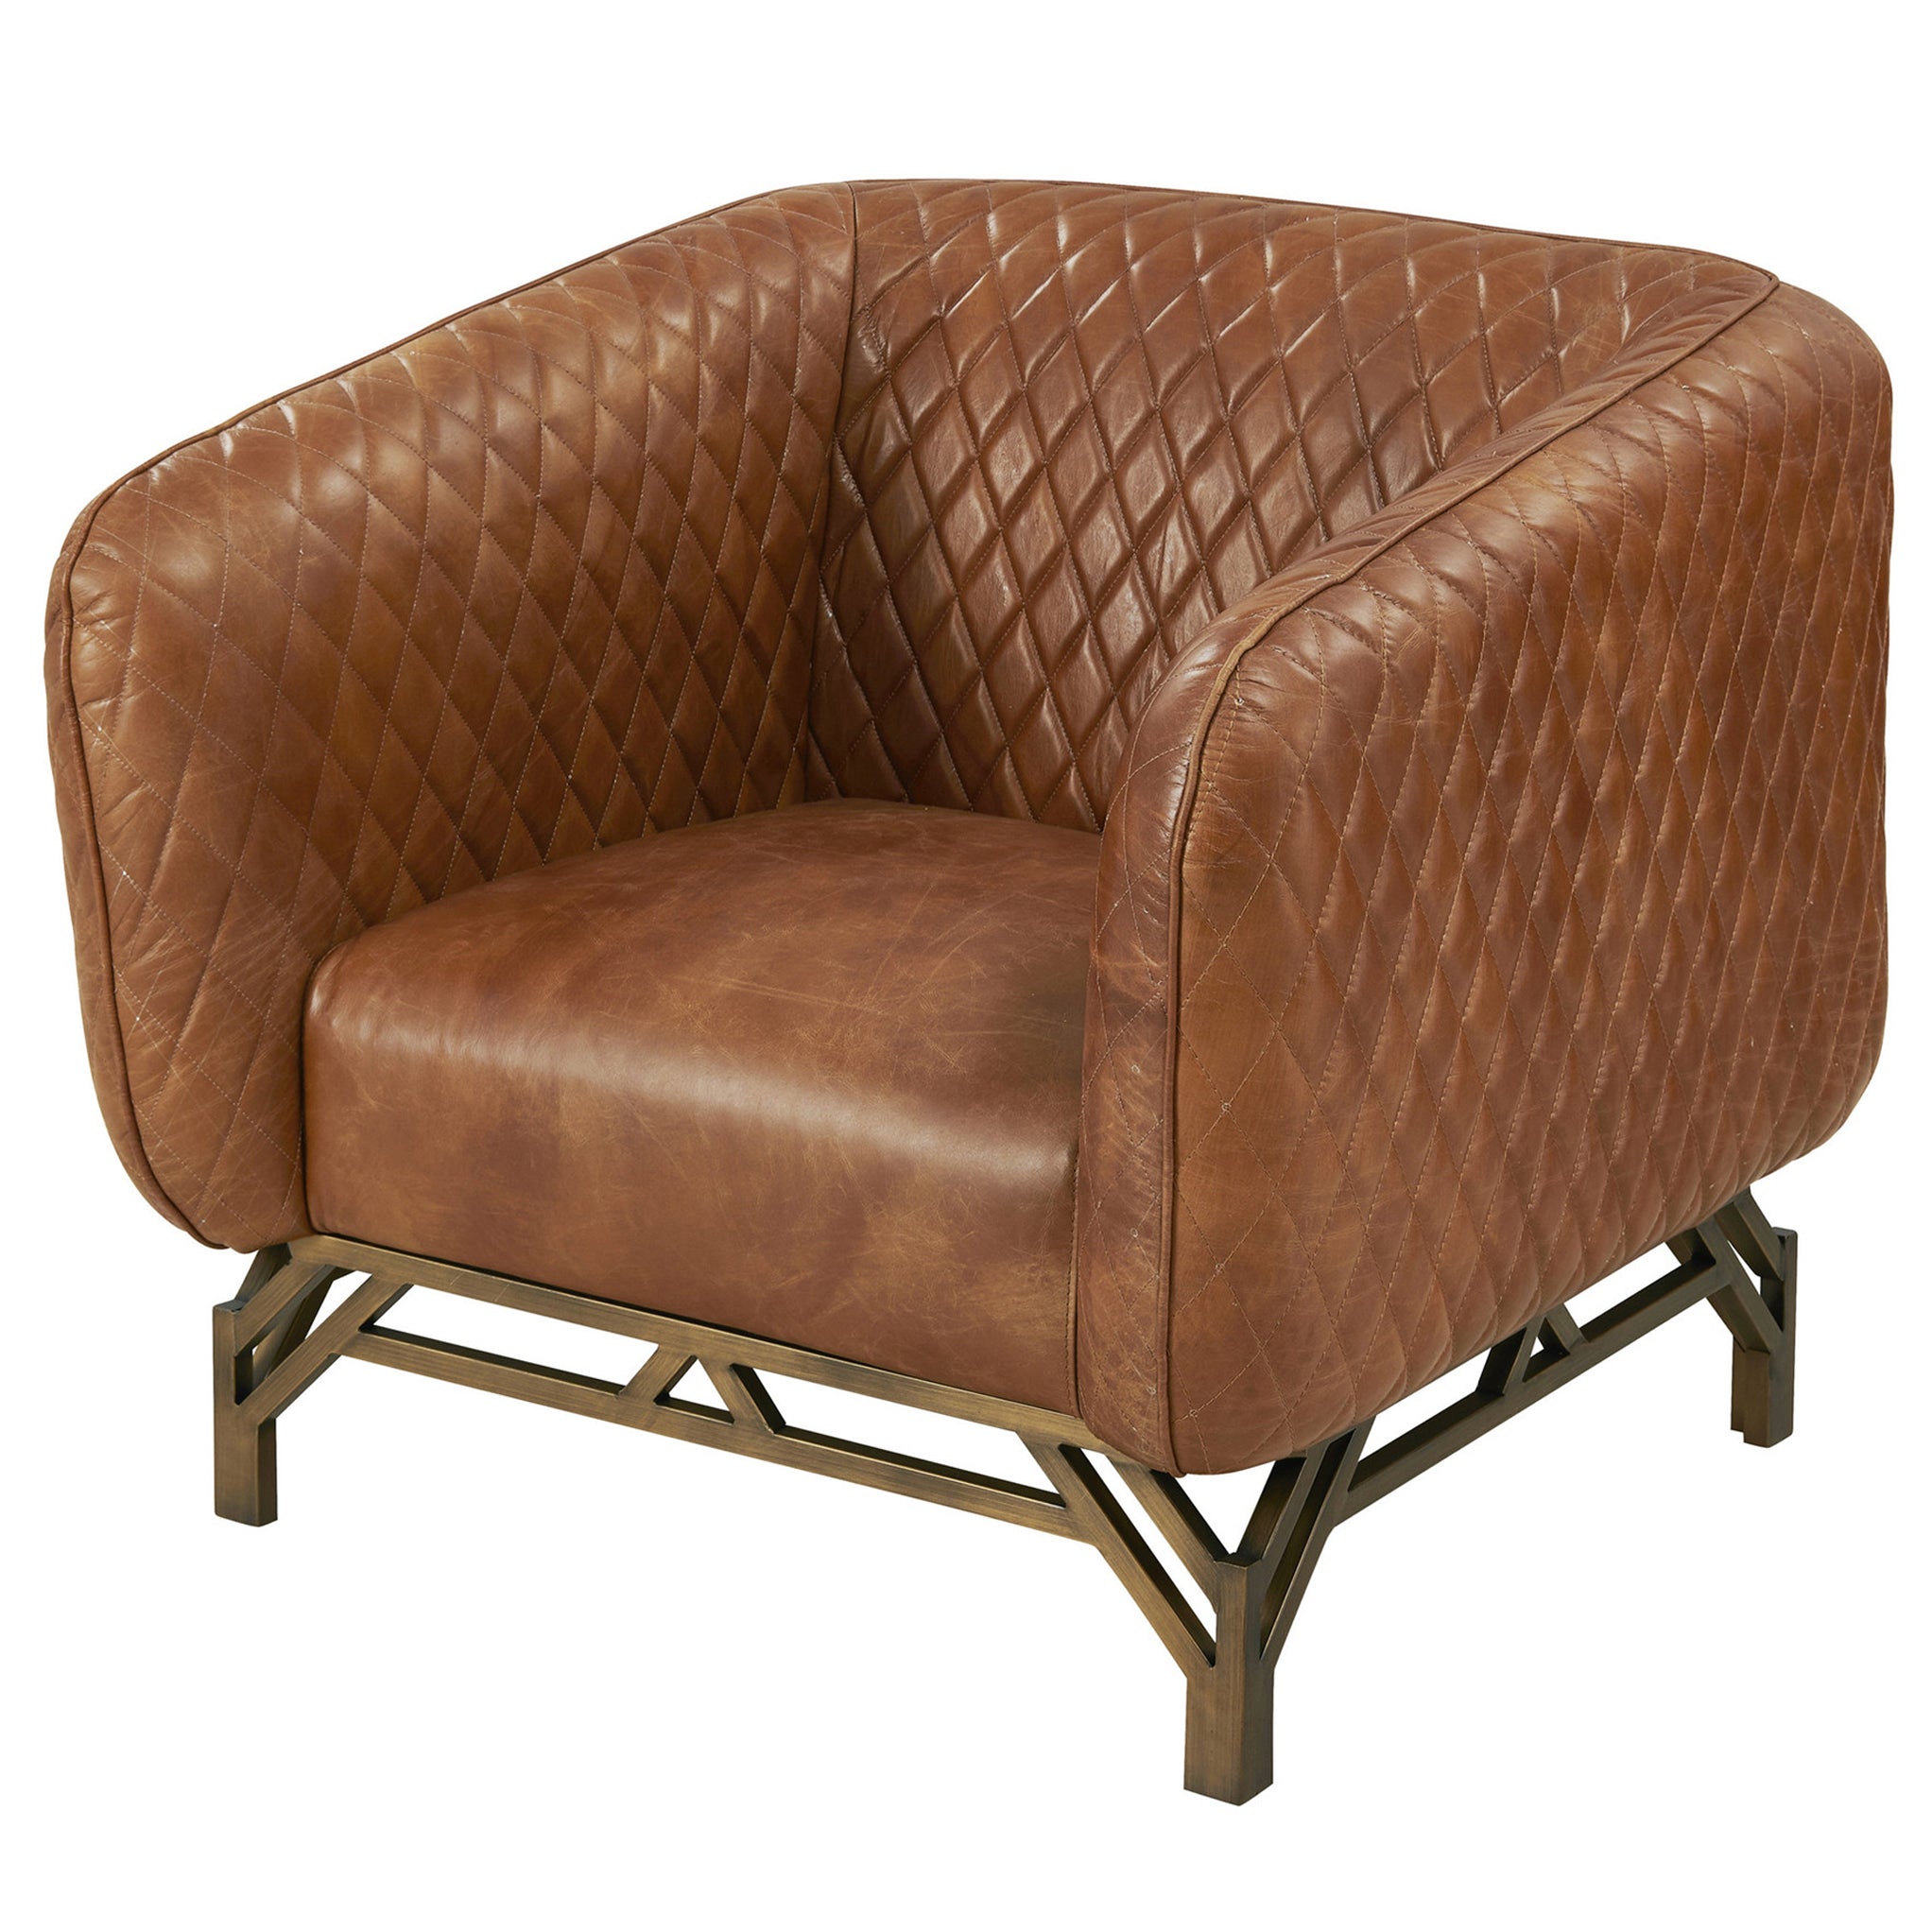 Vincent Industrial Modern Arm Chair - Light Brown Leather — Crafters ...